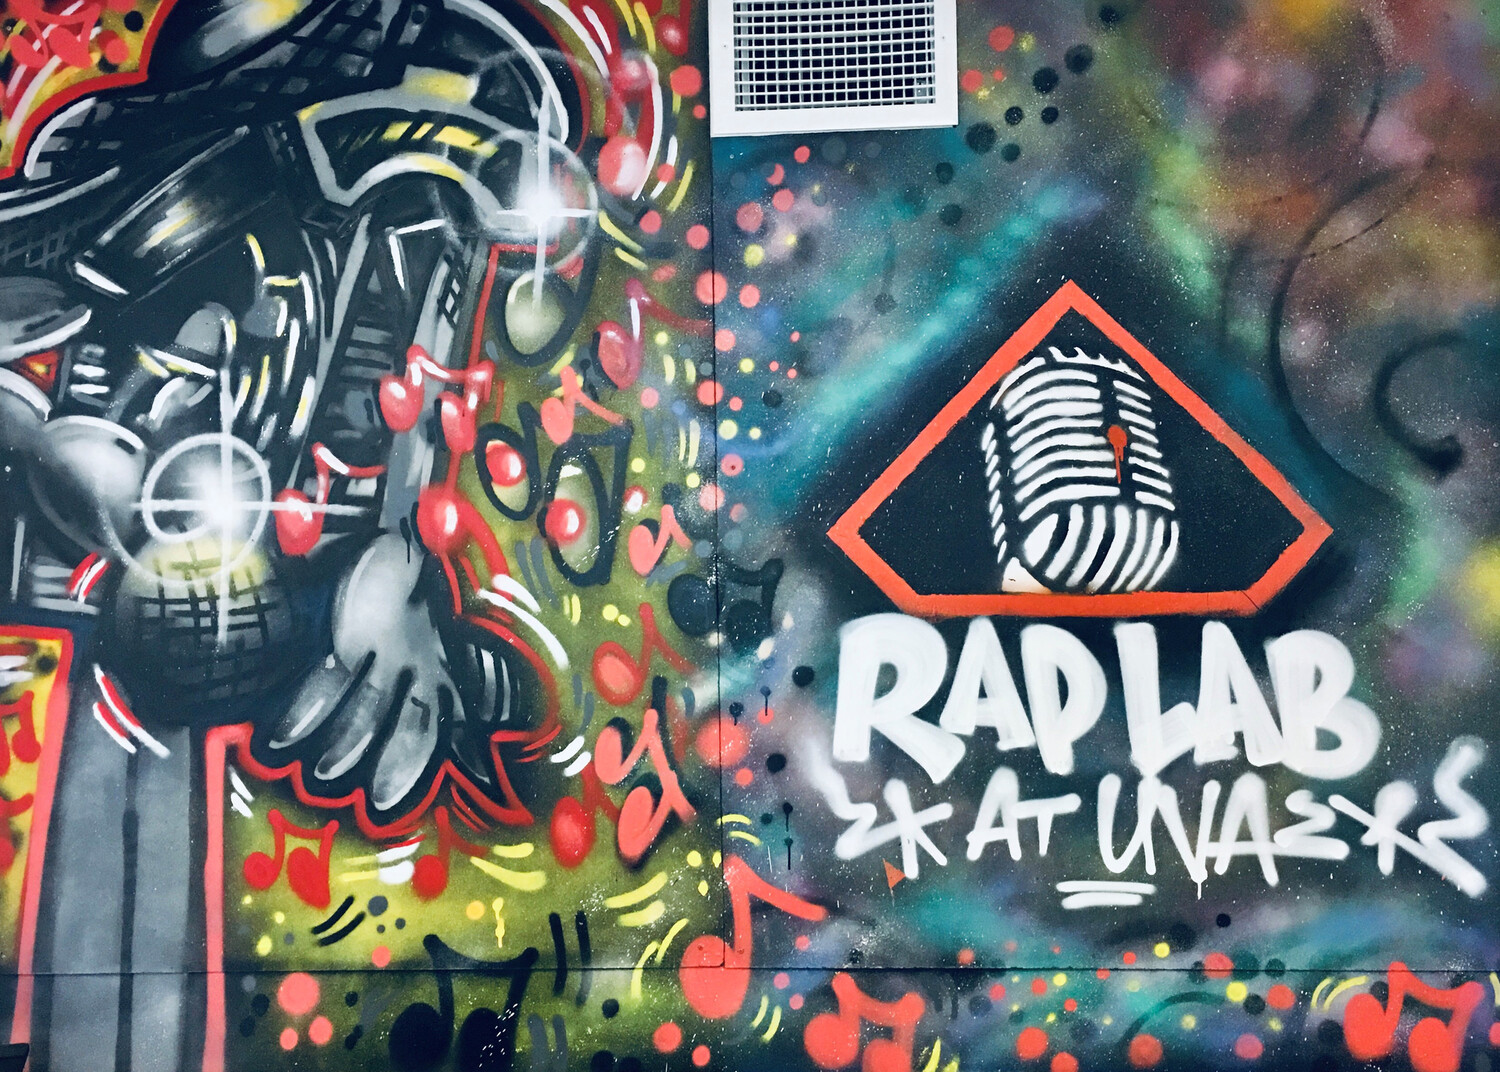 The Rap Lab at UVA & the Charlottesville Mural project, with support from the UVA Arts Fund for Artistic Excellence, teamed up to install murals in the Lab by local graffiti artist Saeoh.